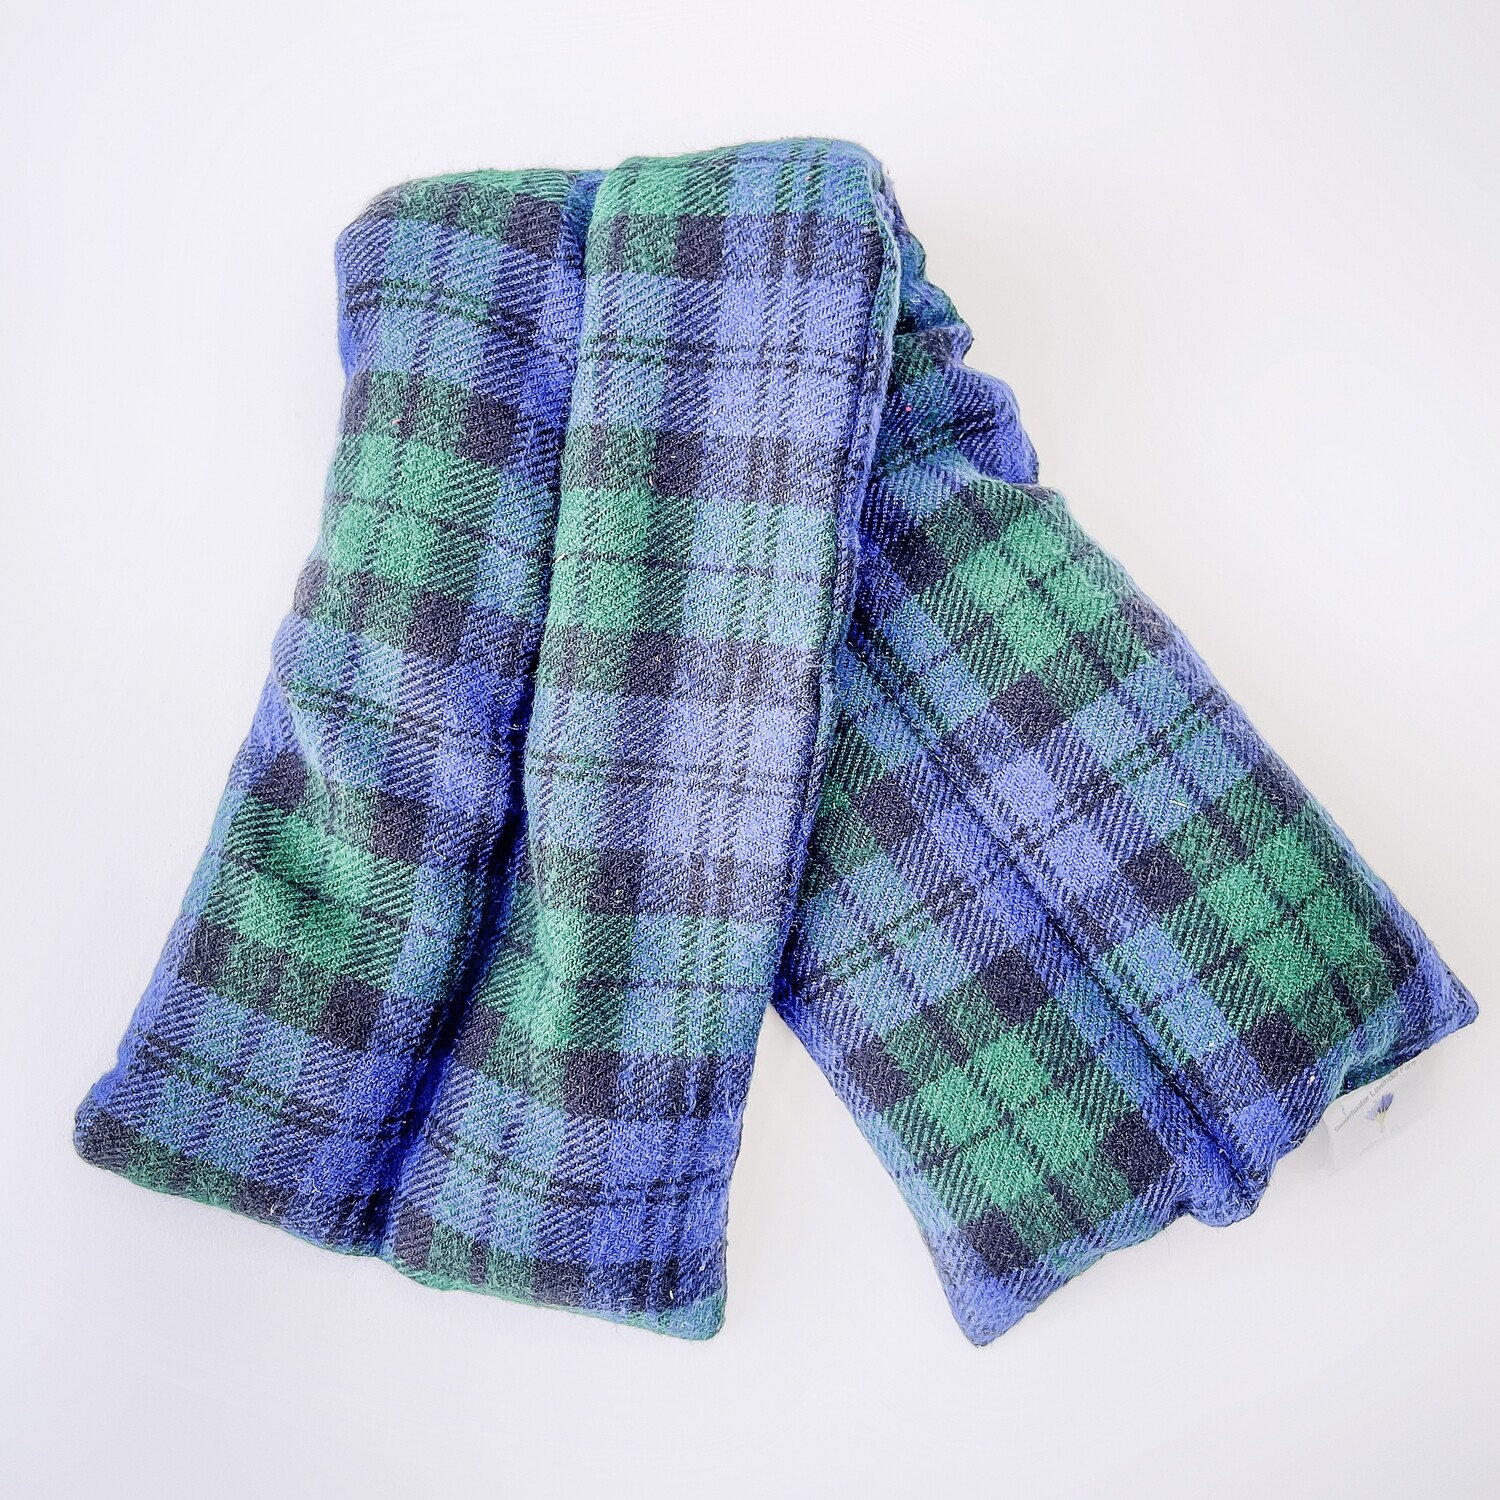 Hot/Cold Aromatherapy Lavender Wrap | Green and Blue Flannel